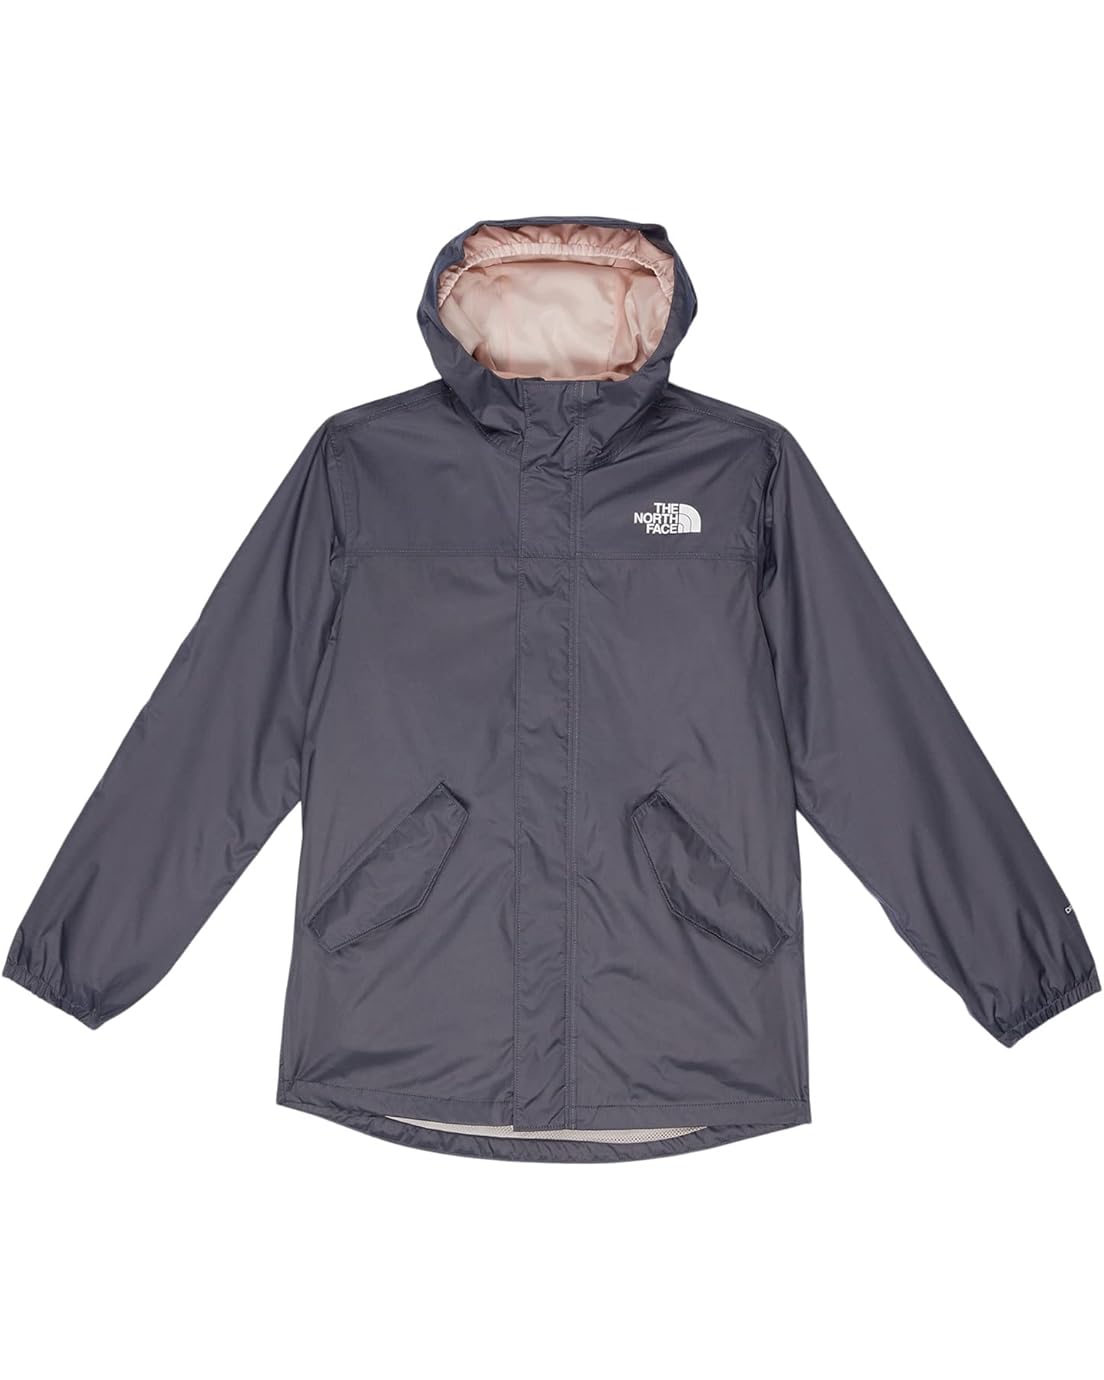 The North Face Kids Stormy Rain Triclimate (Little Kids/Big Kids)